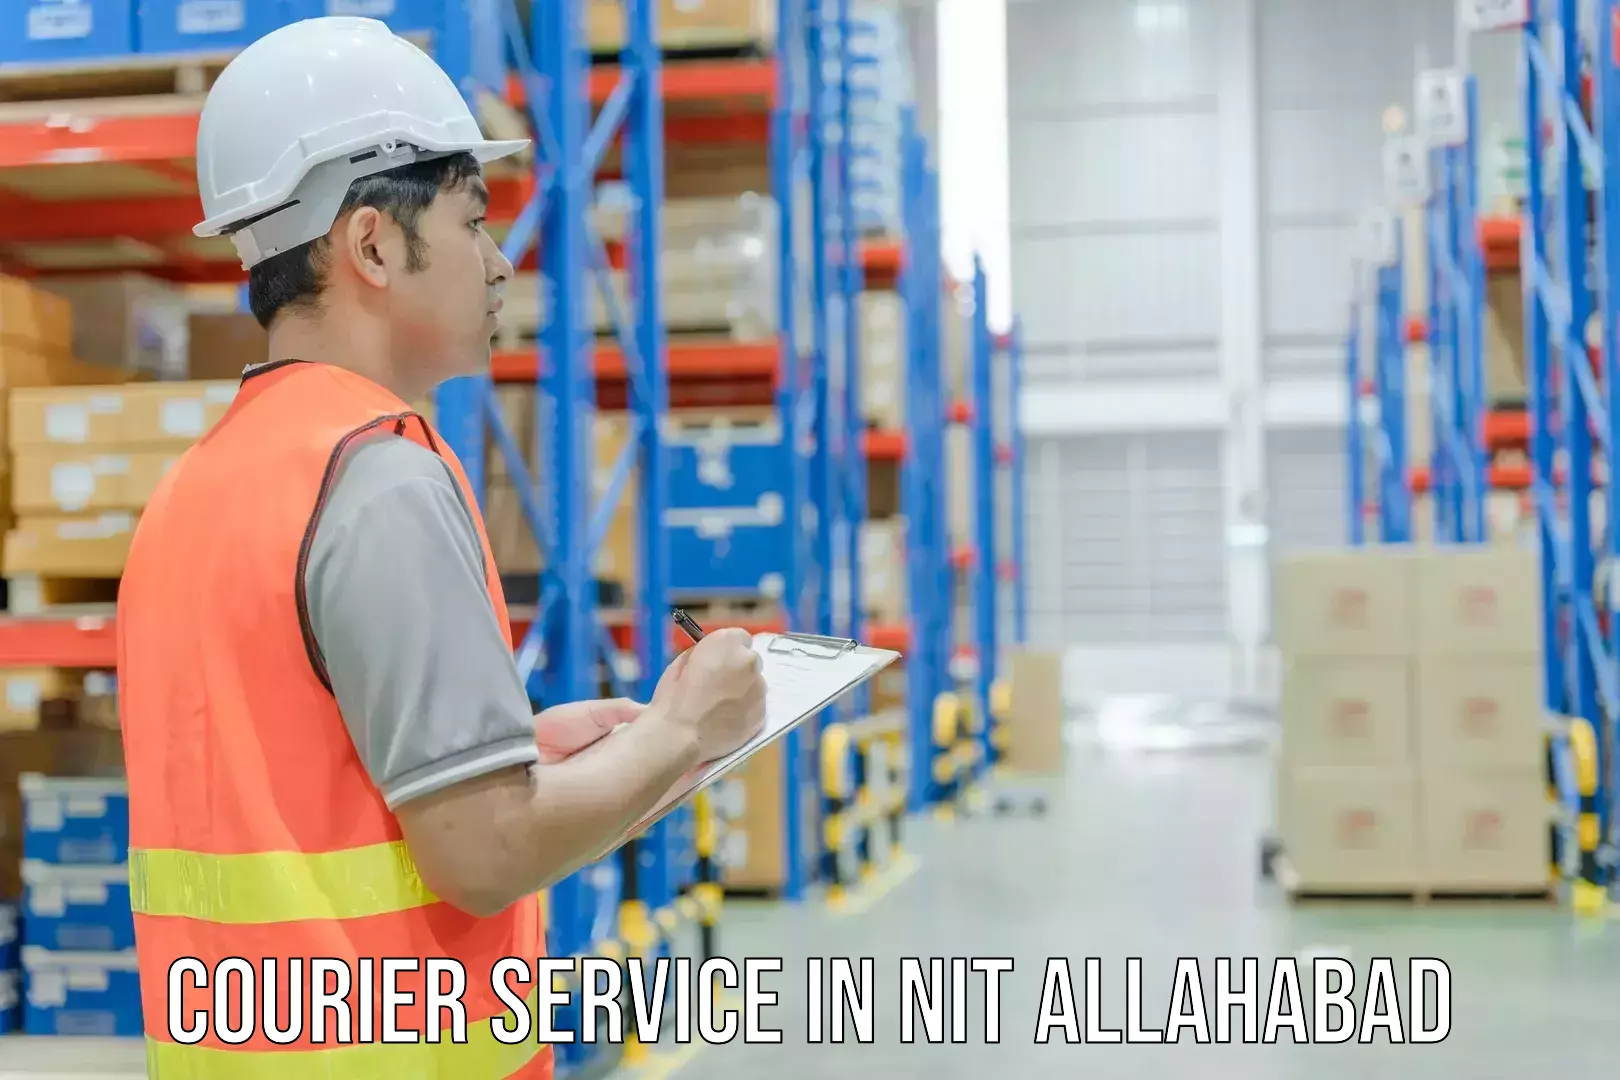 Efficient courier operations in NIT Allahabad